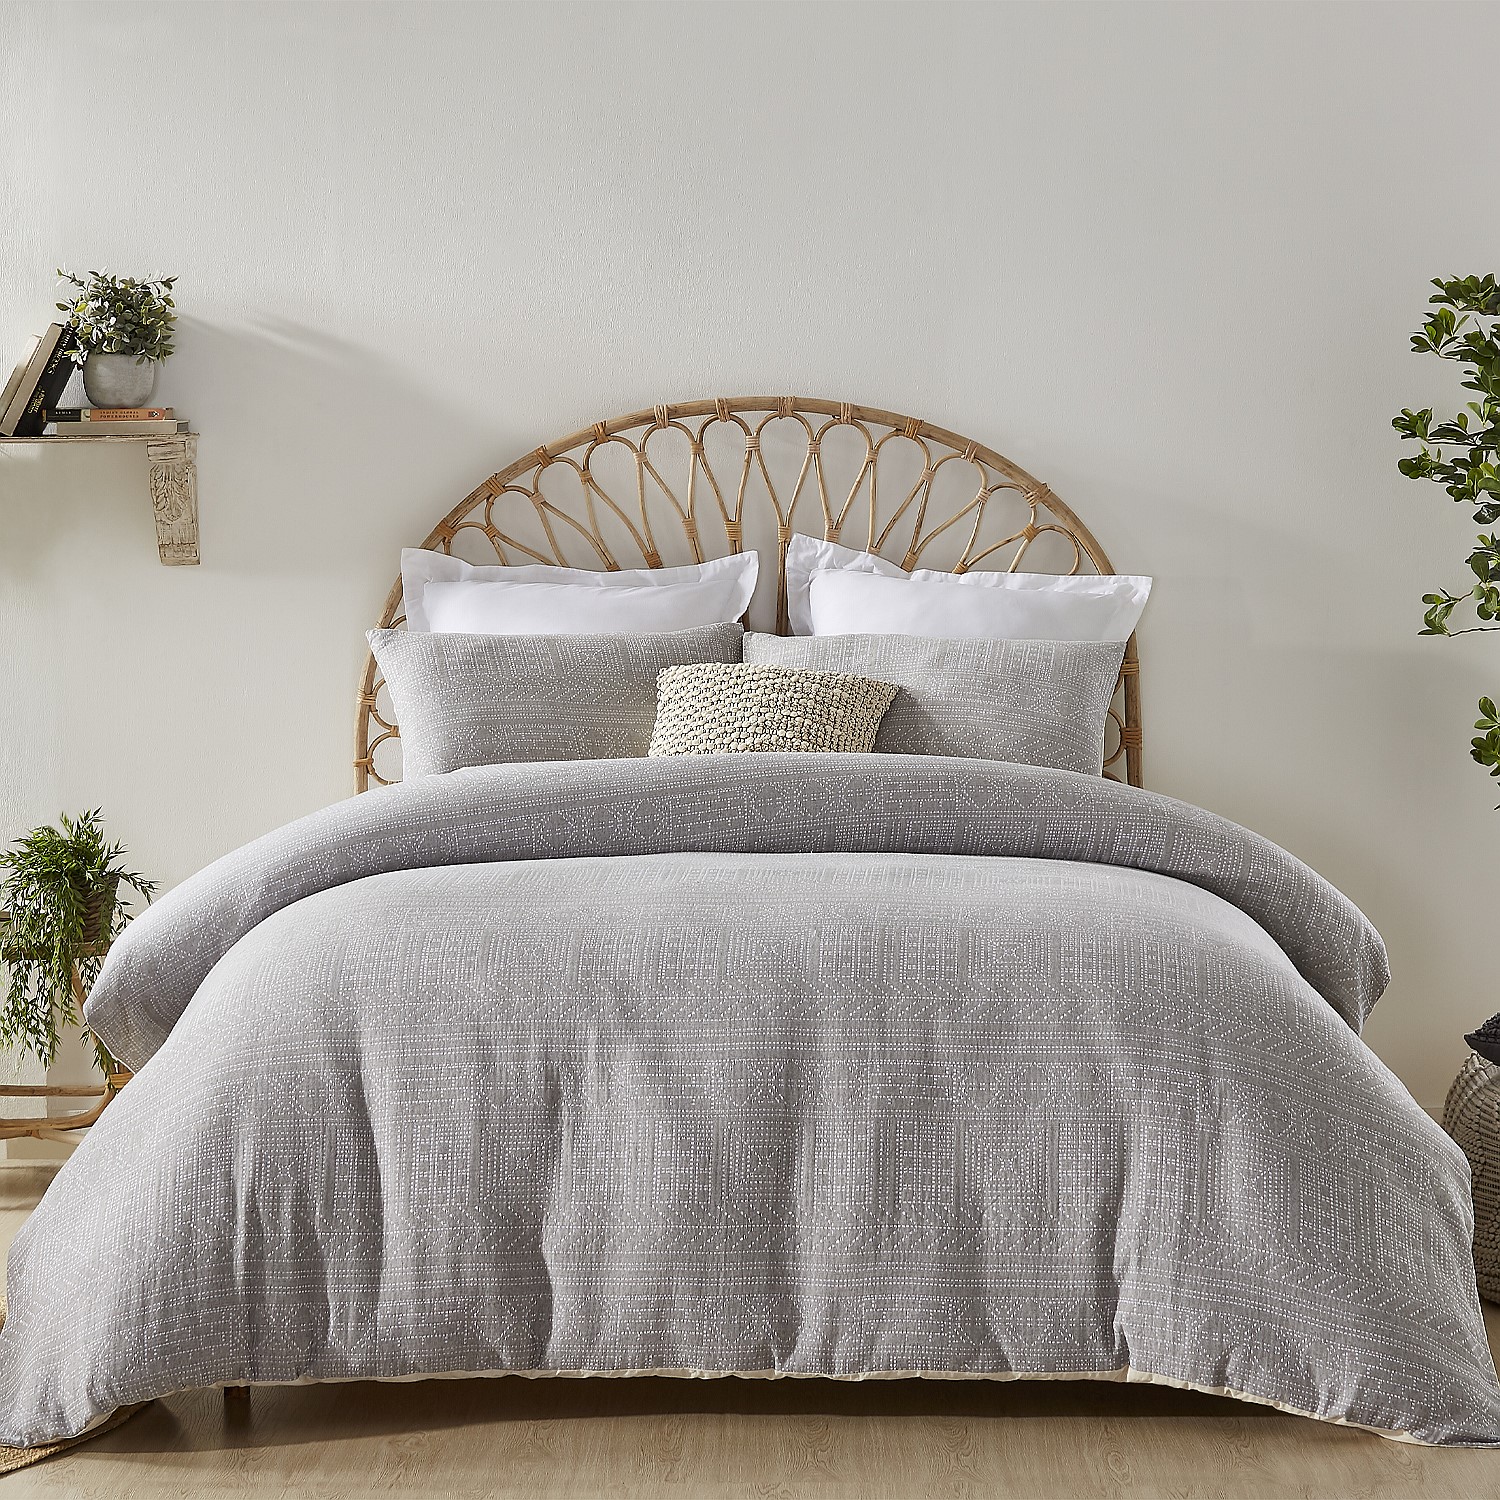 Duvet Covers Istoria Home Tokito 100, Bed Bath And Beyond Duvet Covers Nz